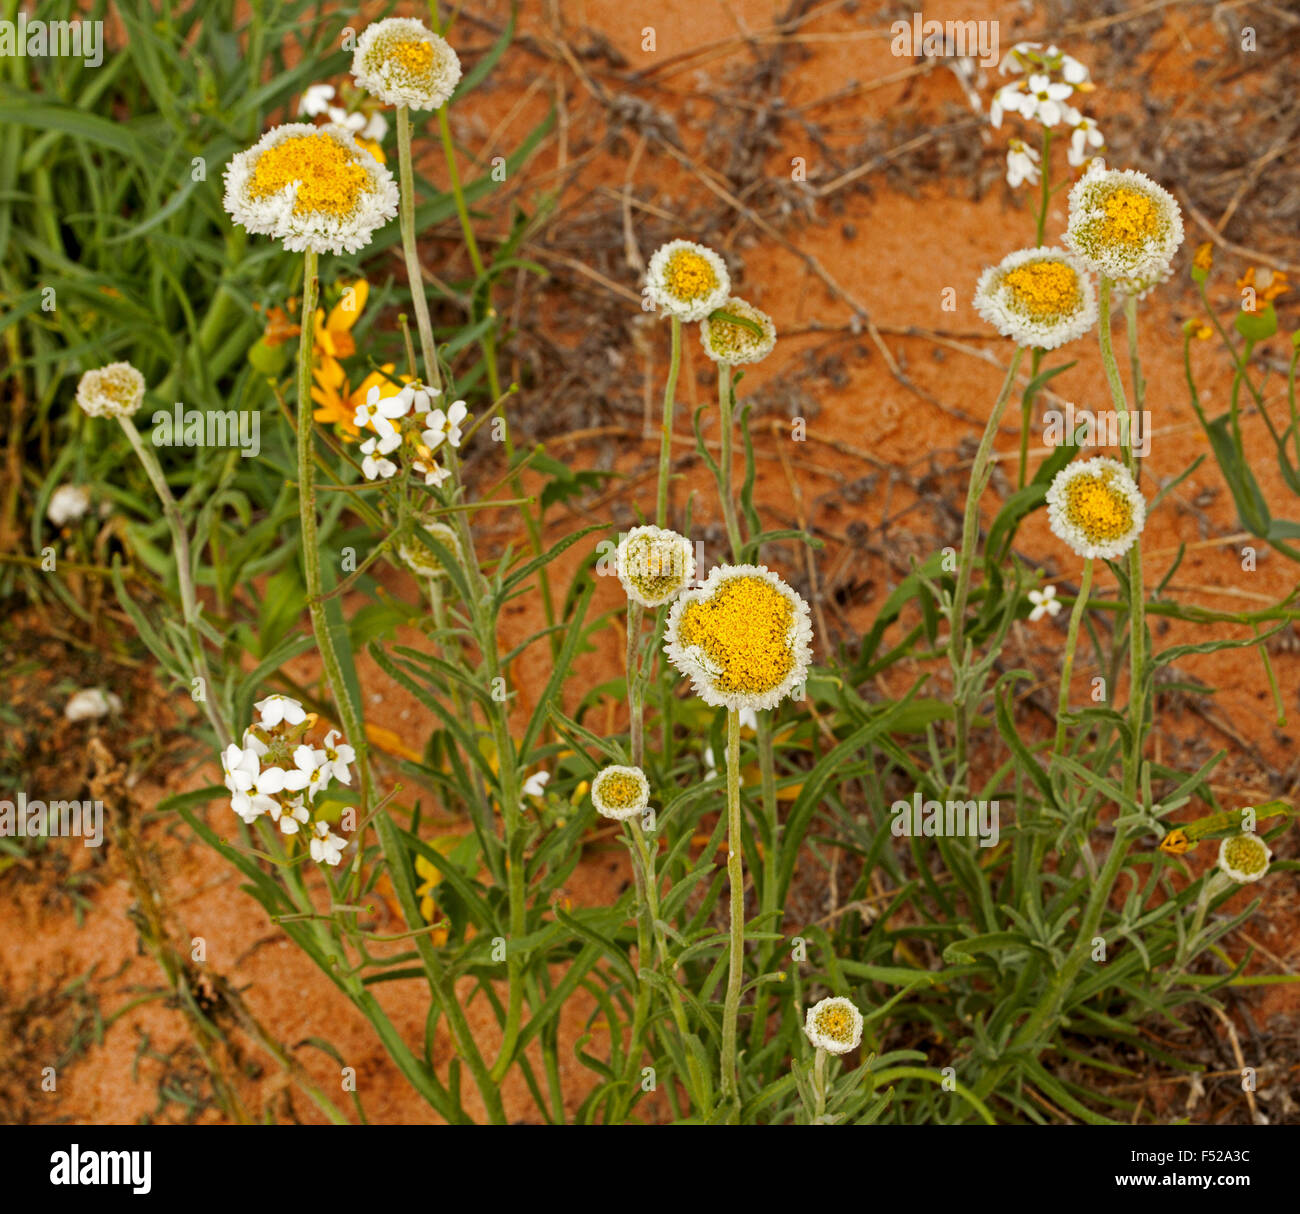 Cluster of yellow & white flowers & leaves of Polycalymma stuartii, poached egg daisies growing in red soil of outback Australia Stock Photo